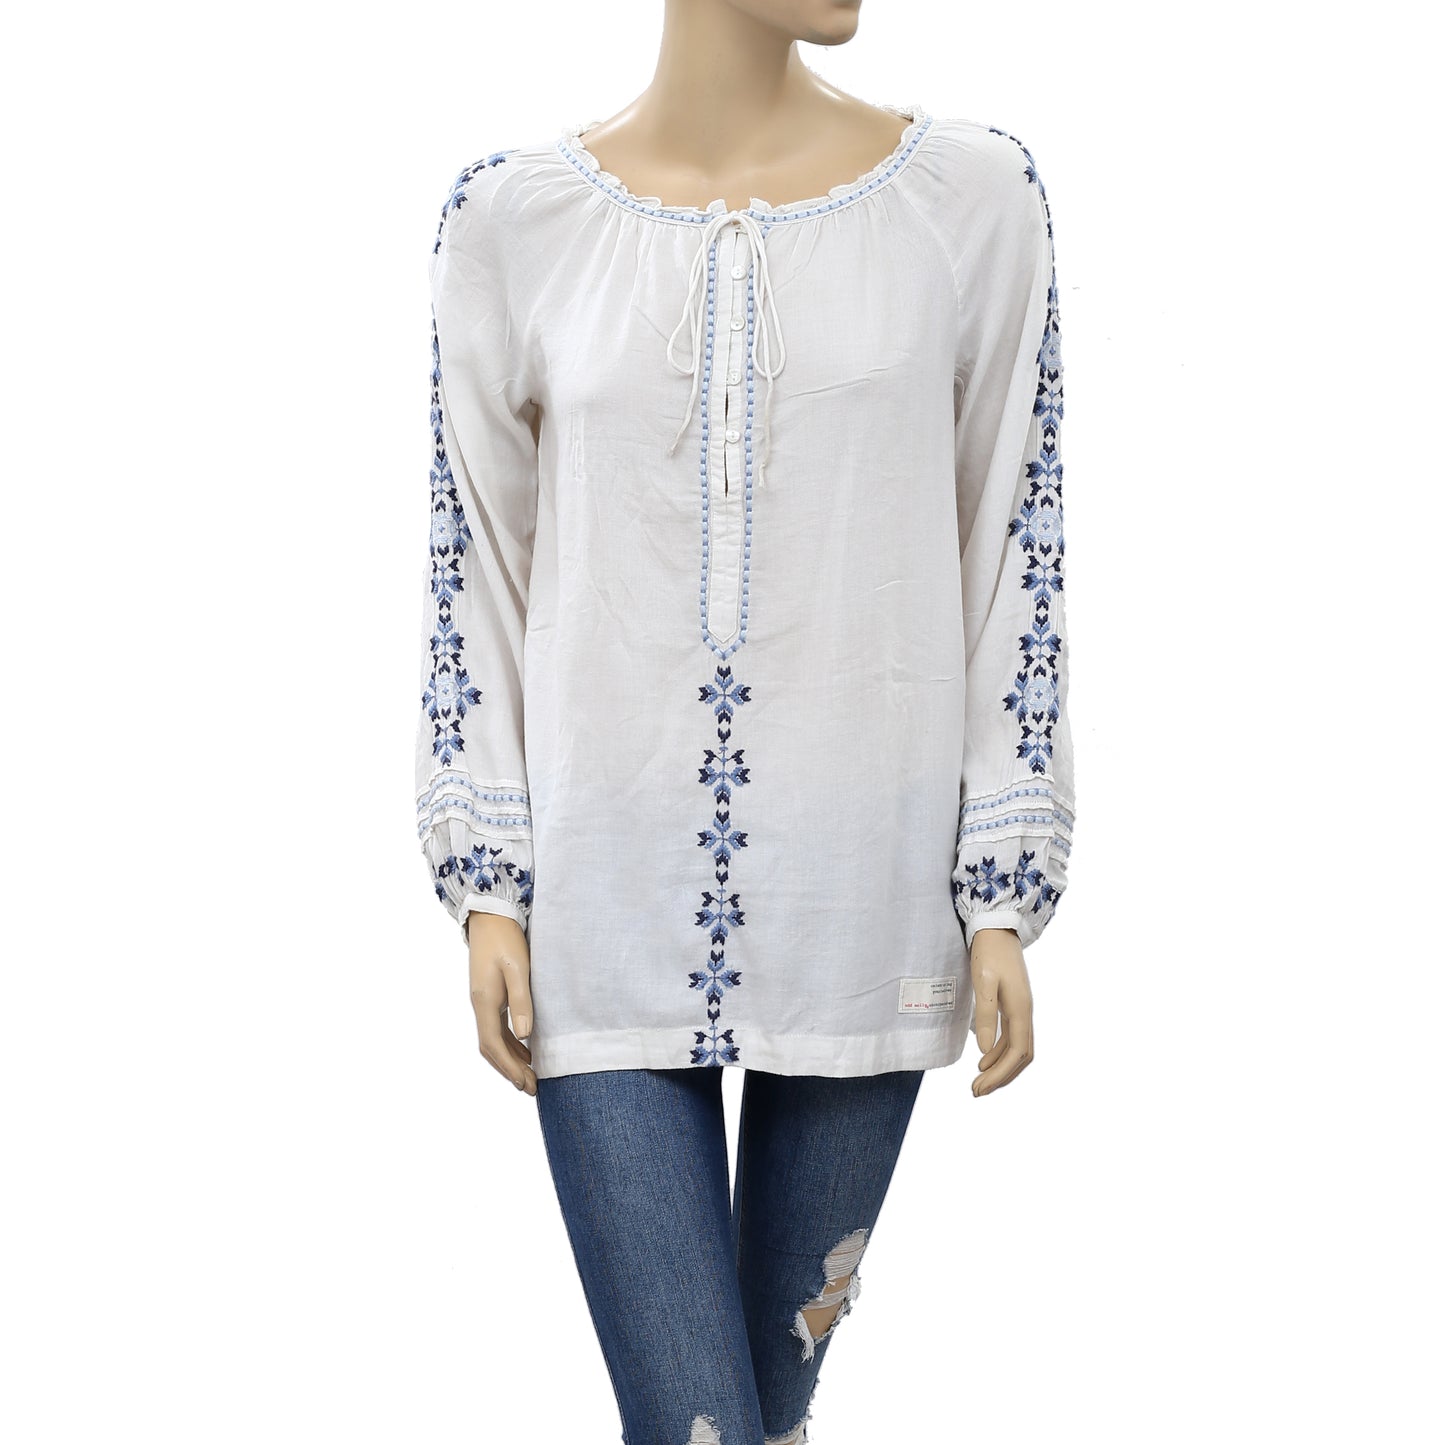 Odd Molly Anthropologie Floral Embroidered Blouse Top